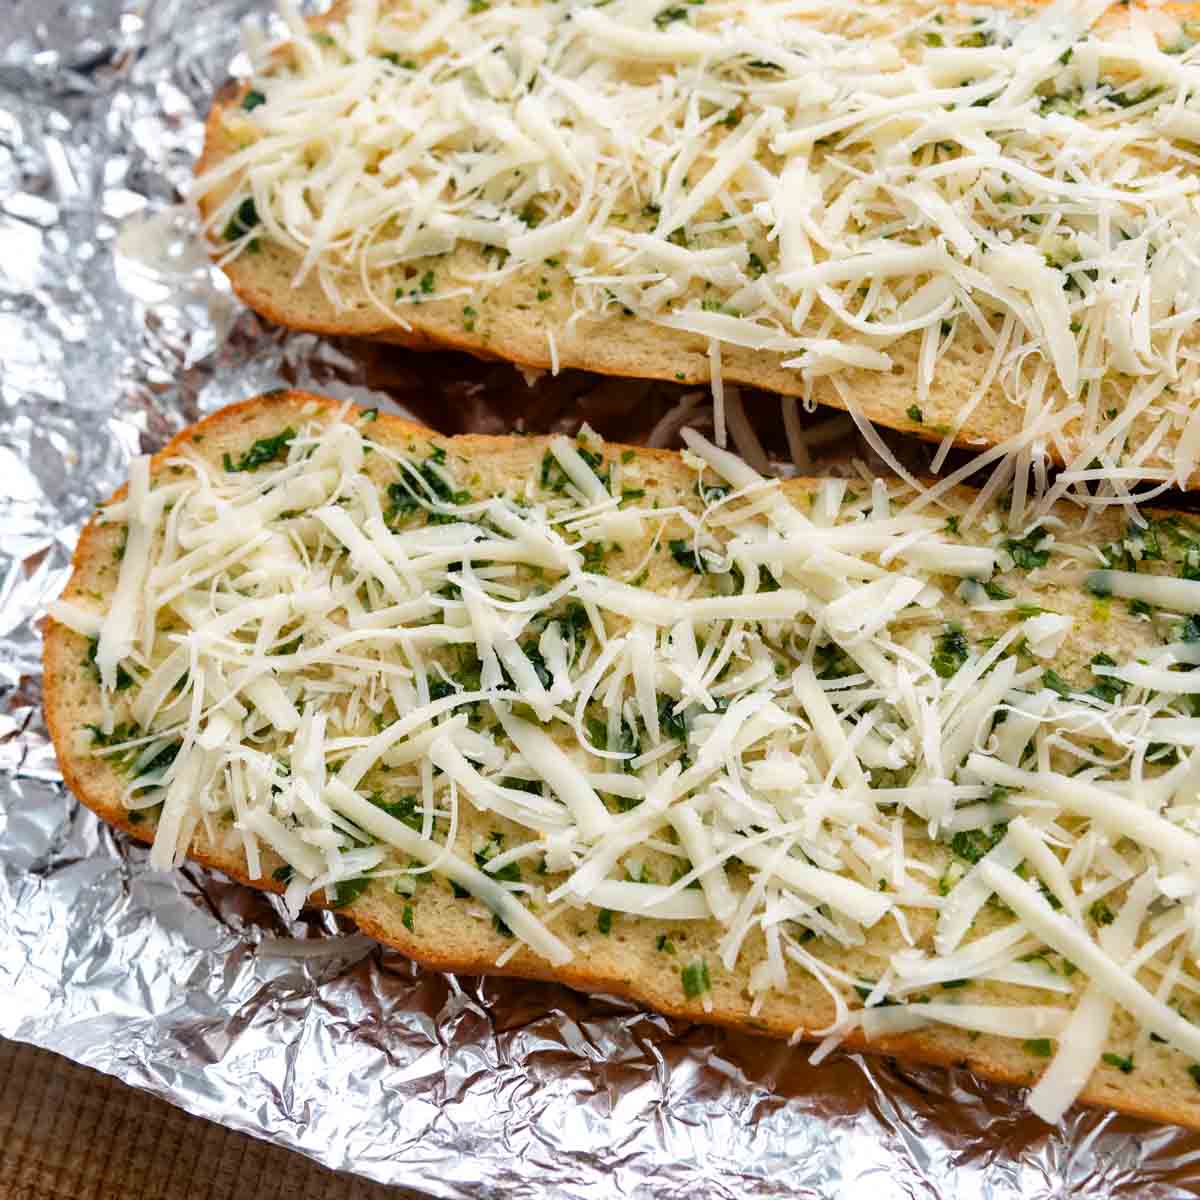 cut bread halves with cheese sprinkled on top before baking.